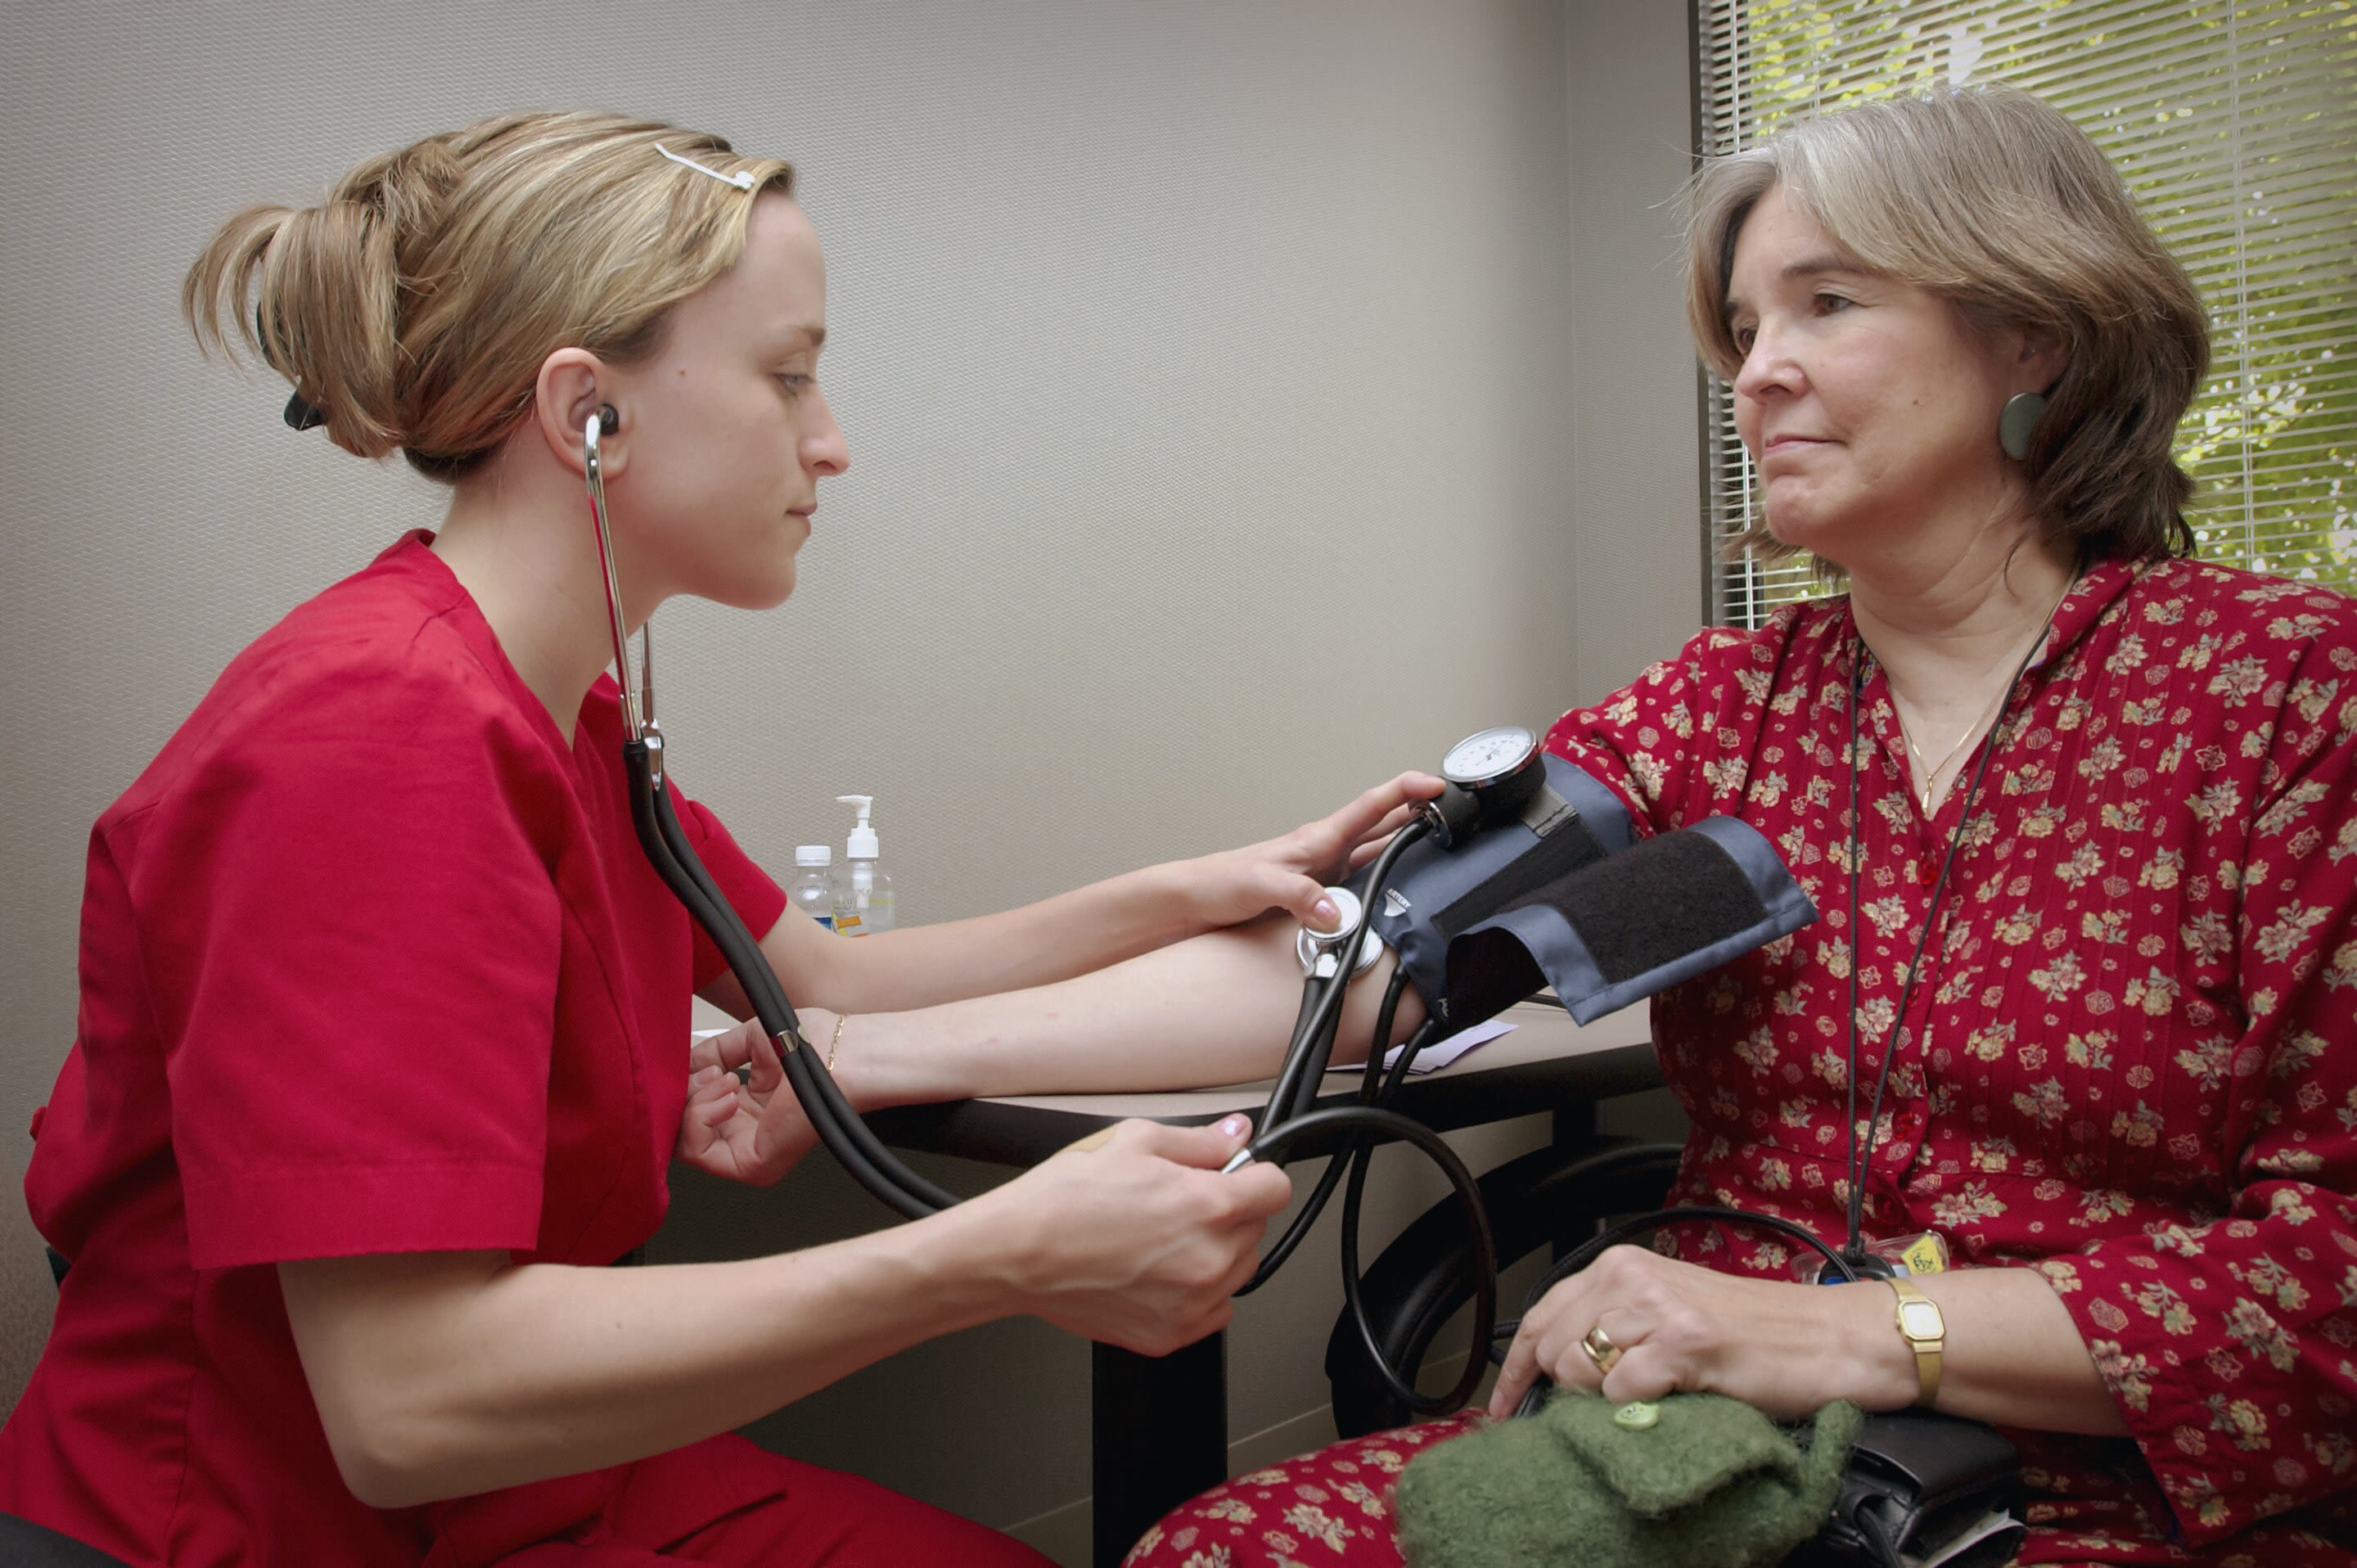 Intensive blood pressure treatment may help some middle-aged women with type 2 diabetes, early-onset hypertension